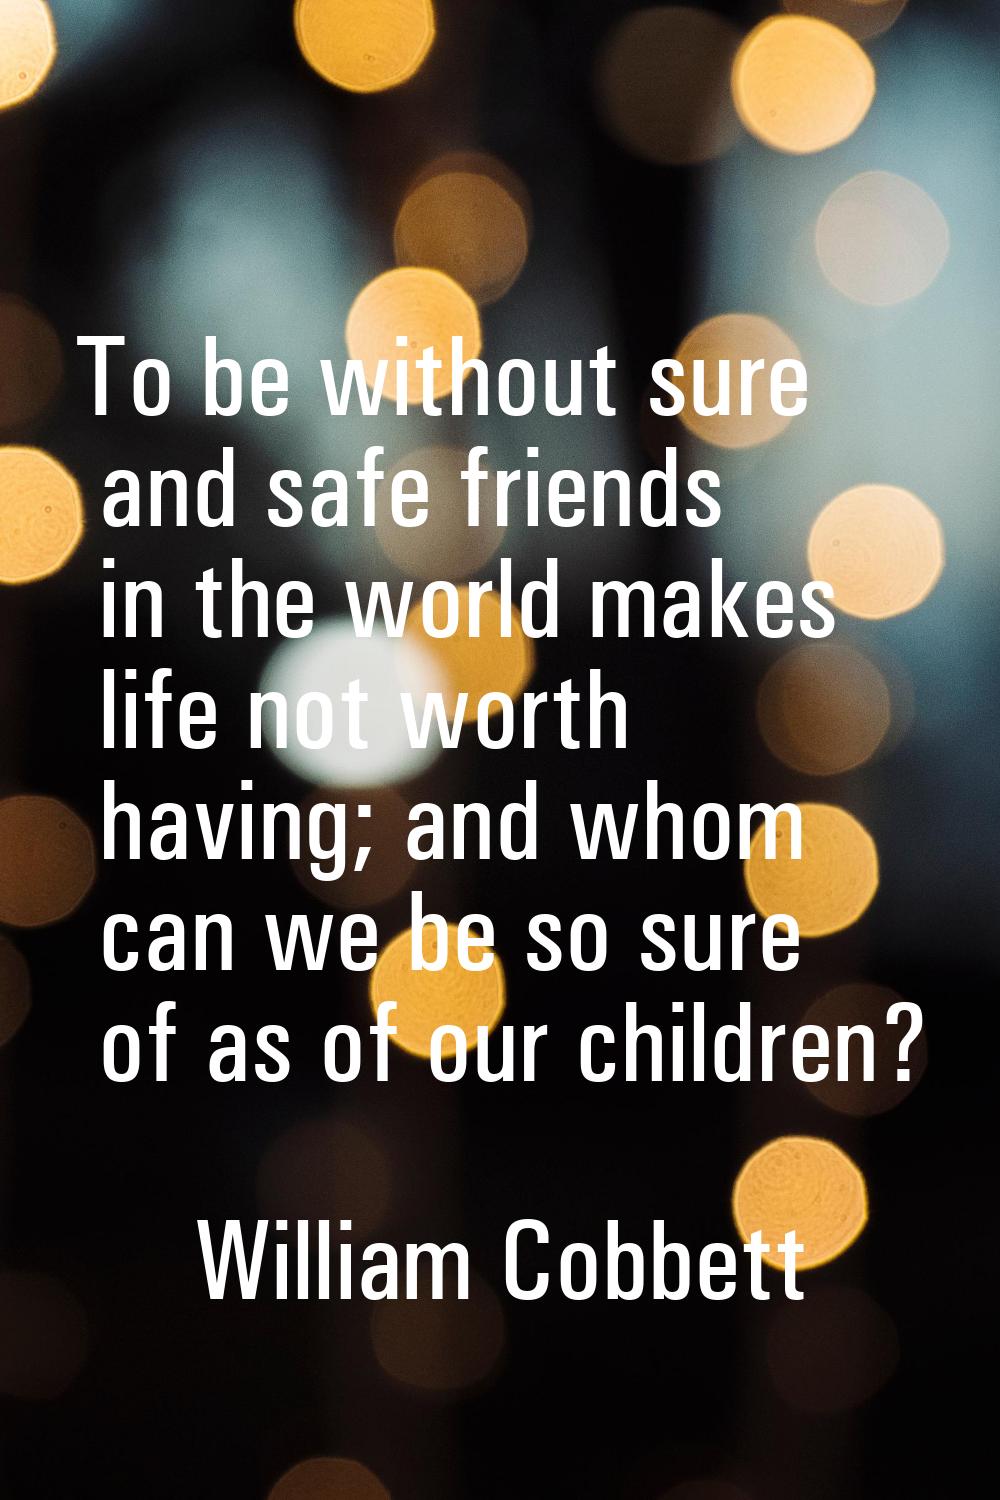 To be without sure and safe friends in the world makes life not worth having; and whom can we be so